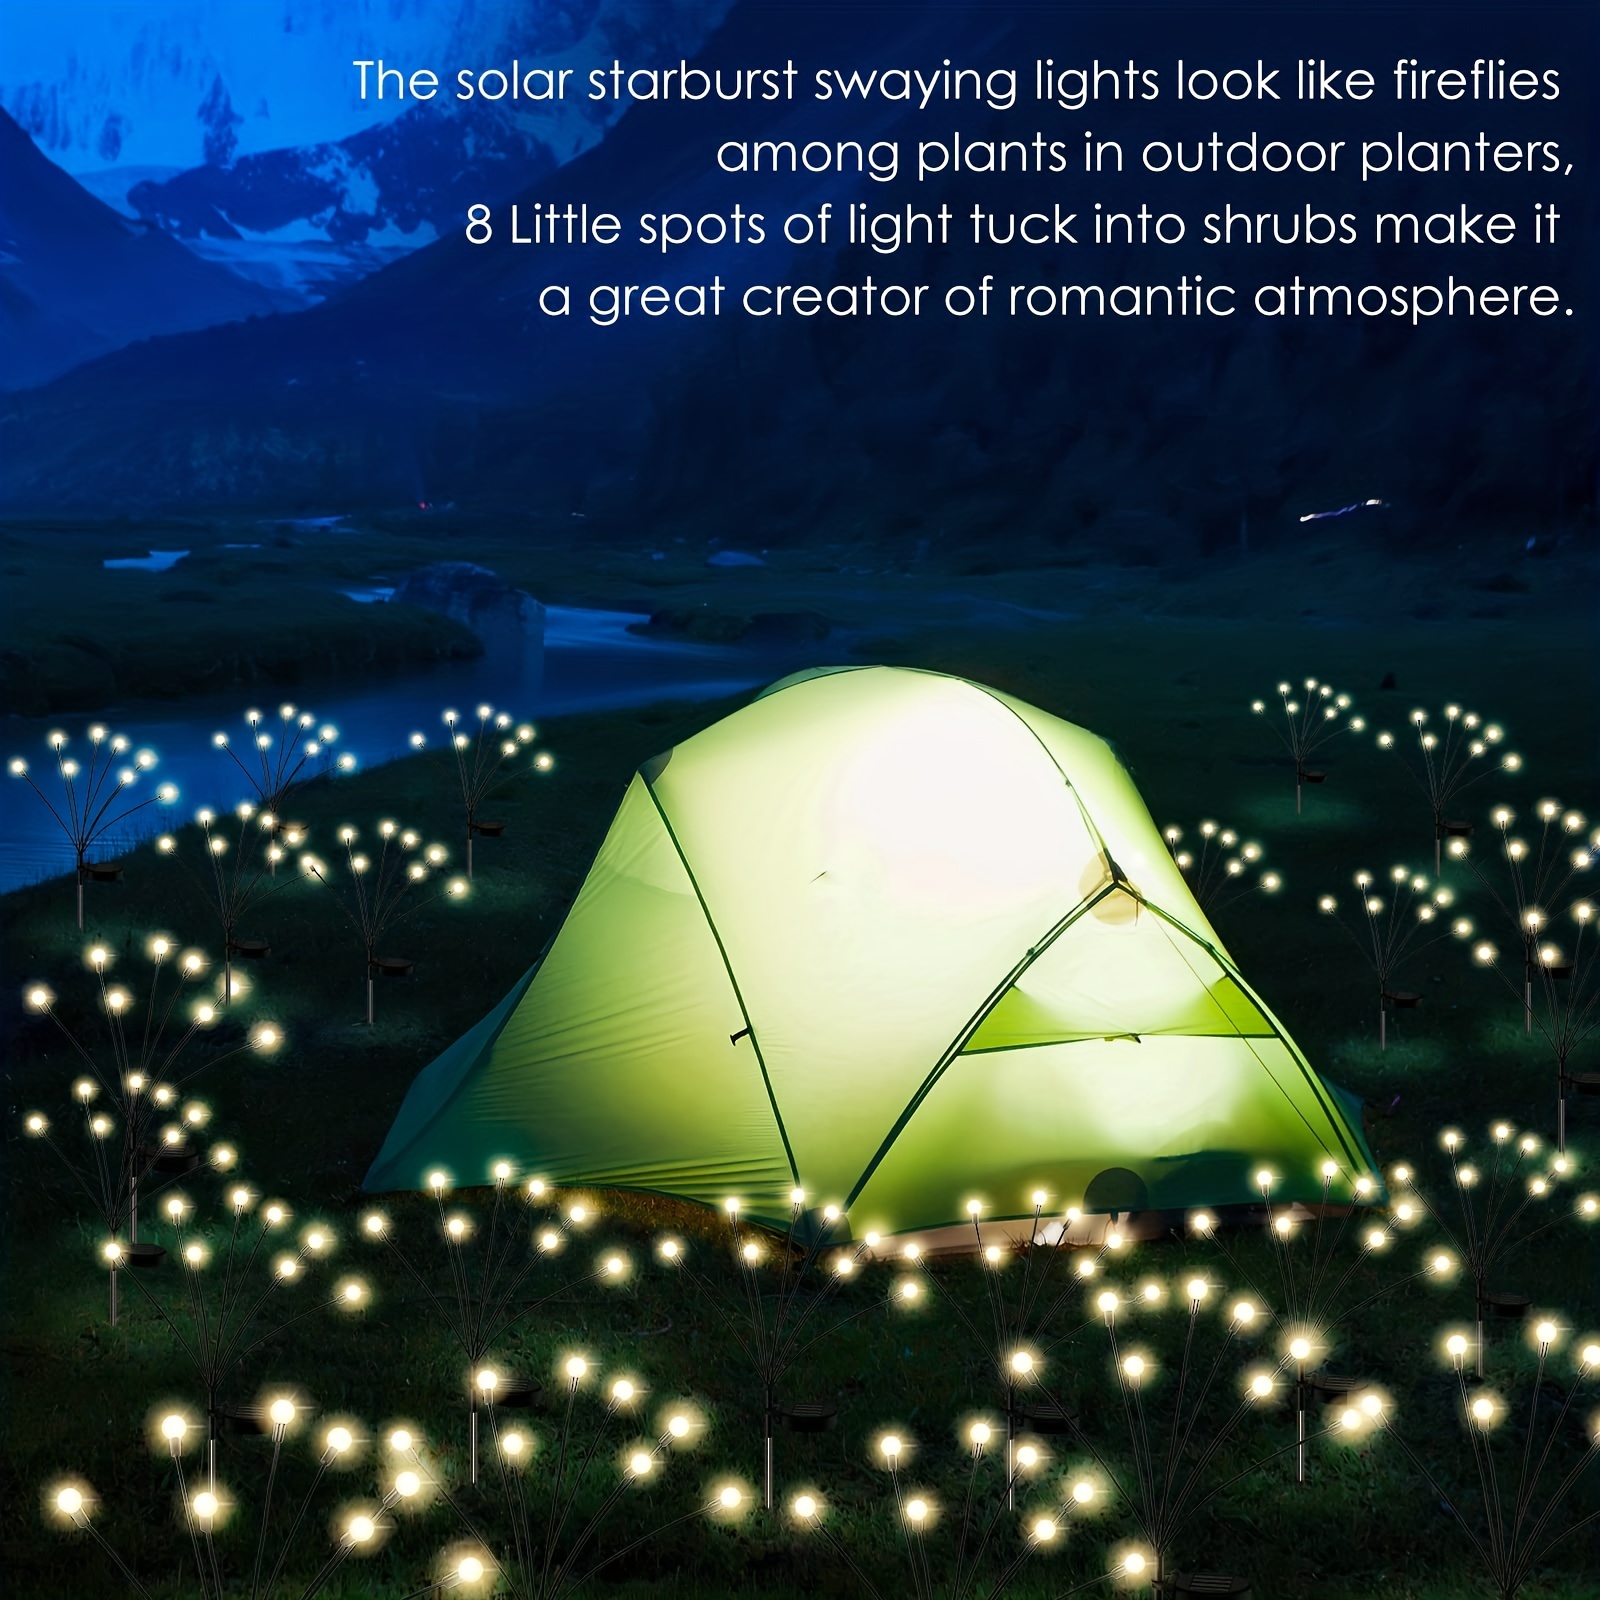 The 6 Best LED Tent Lights For Camping